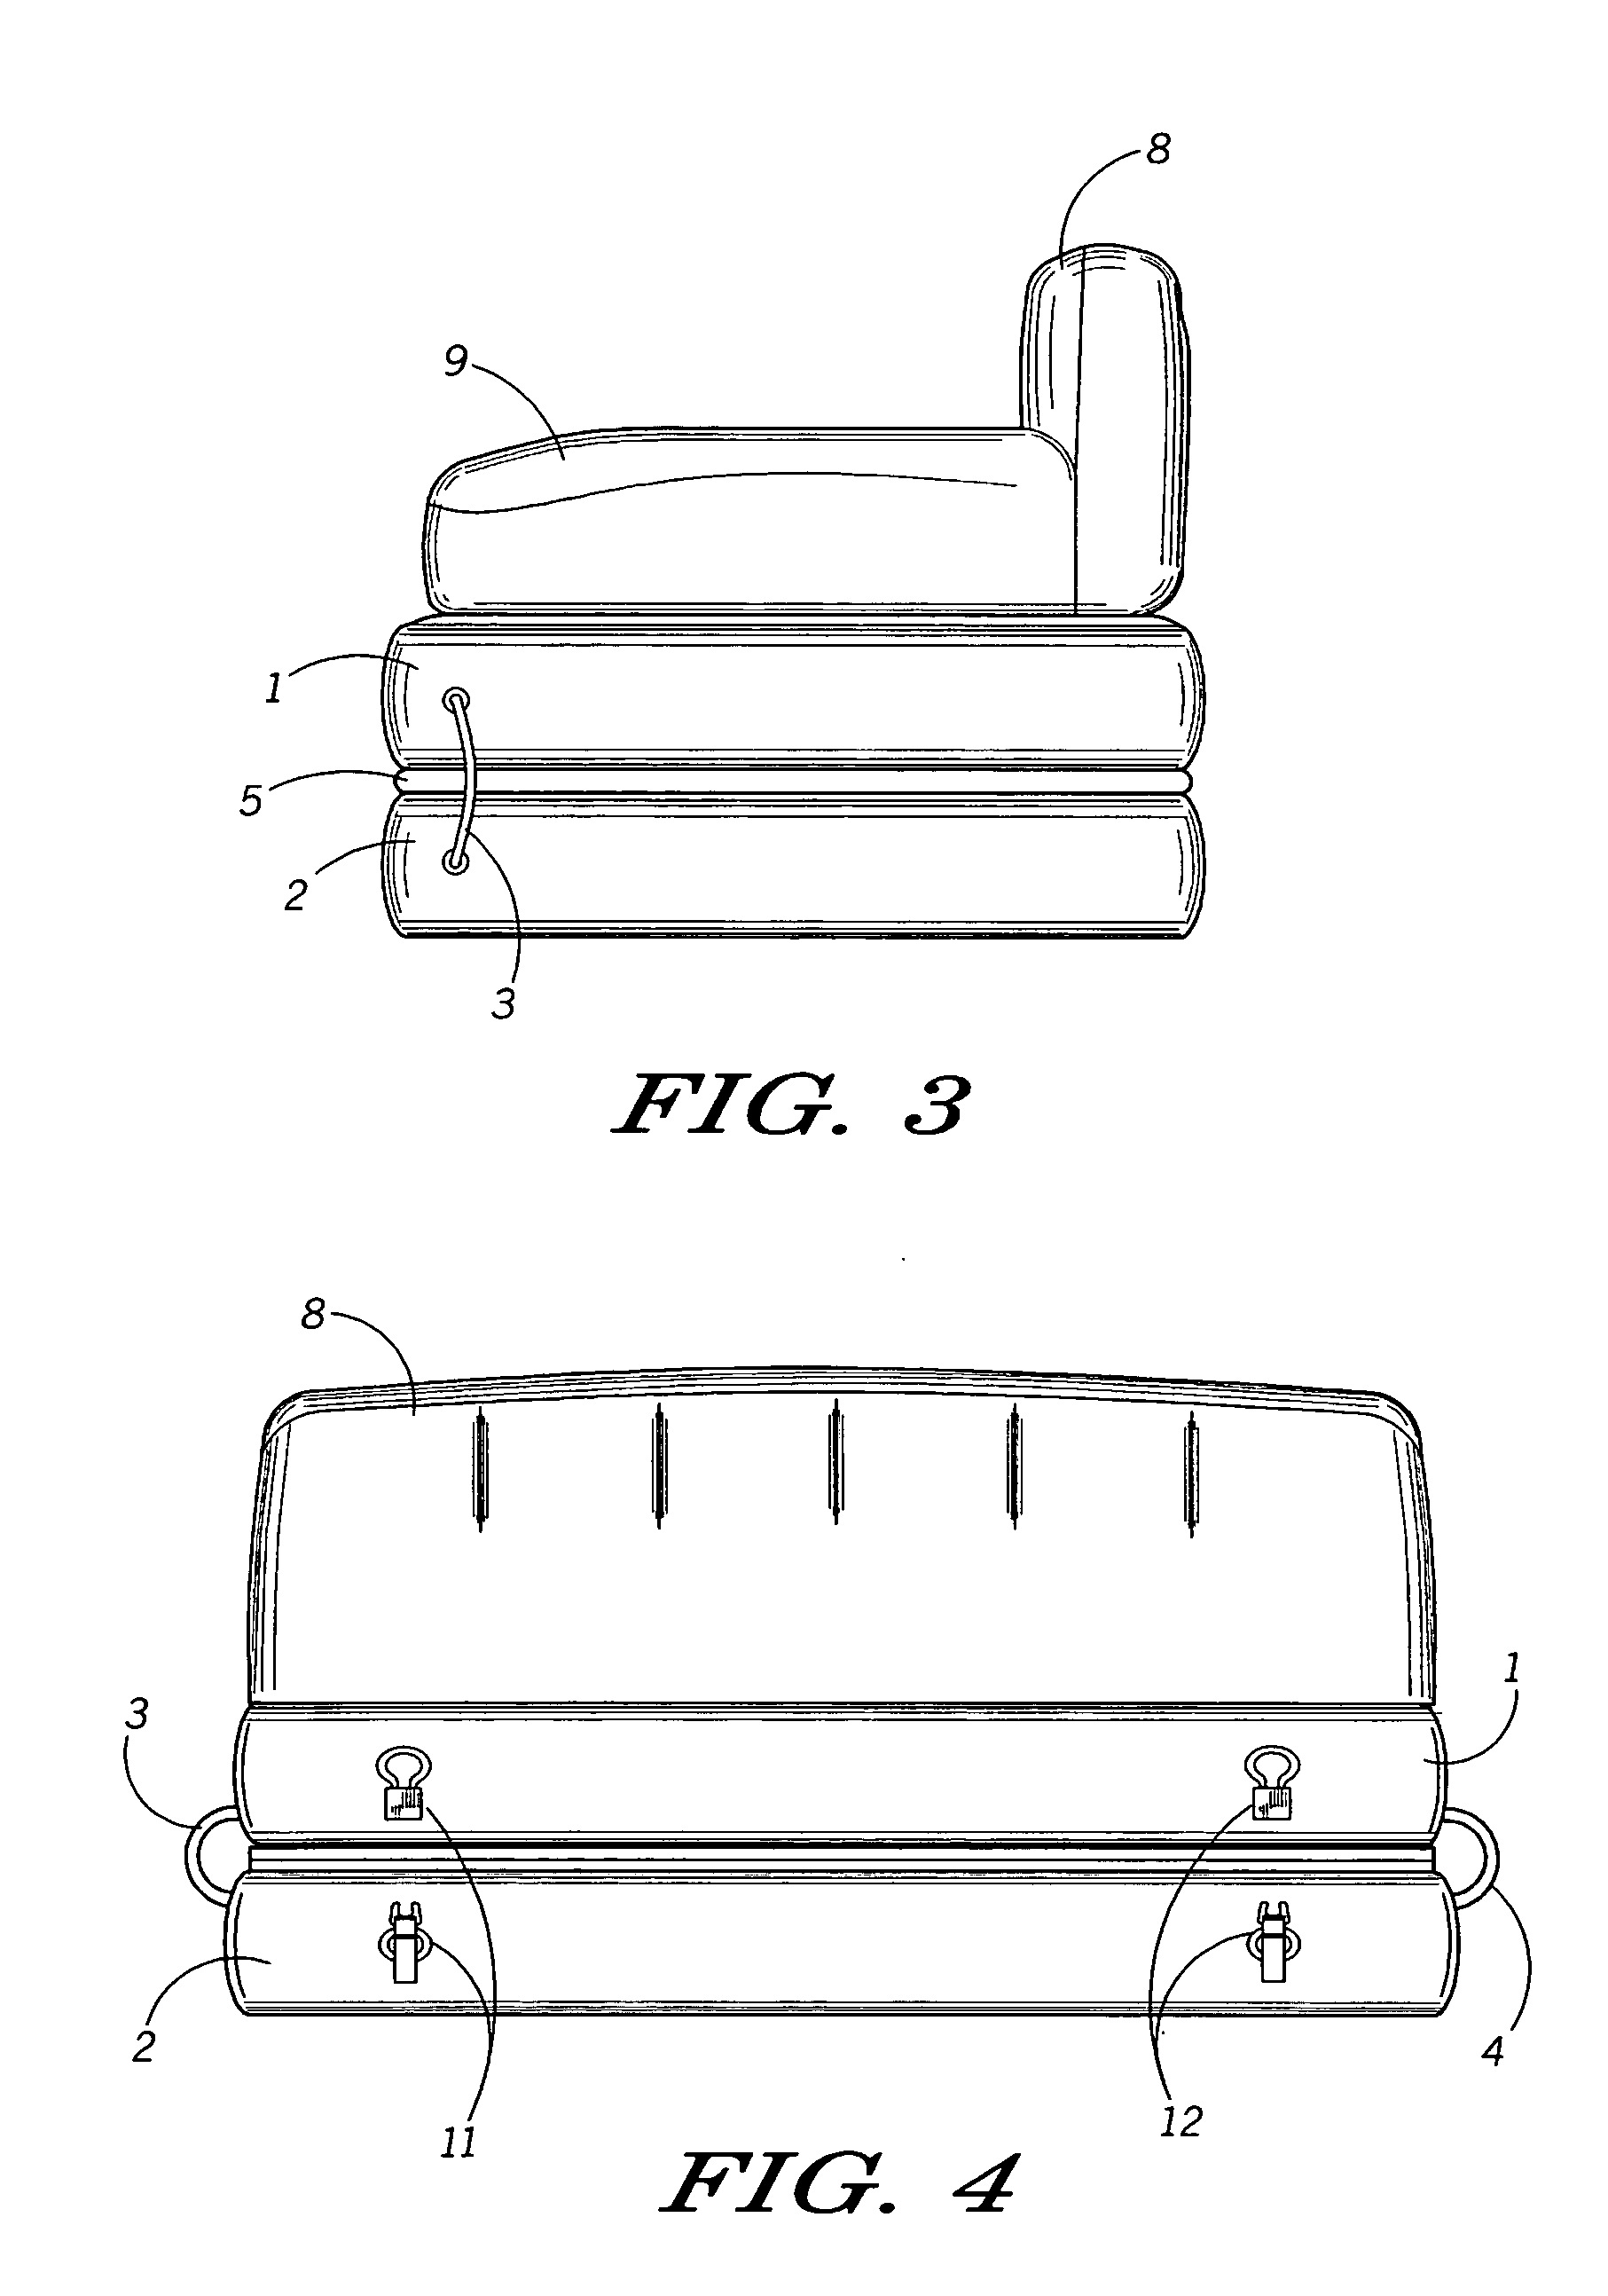 Inflatable article of furniture and method of using same